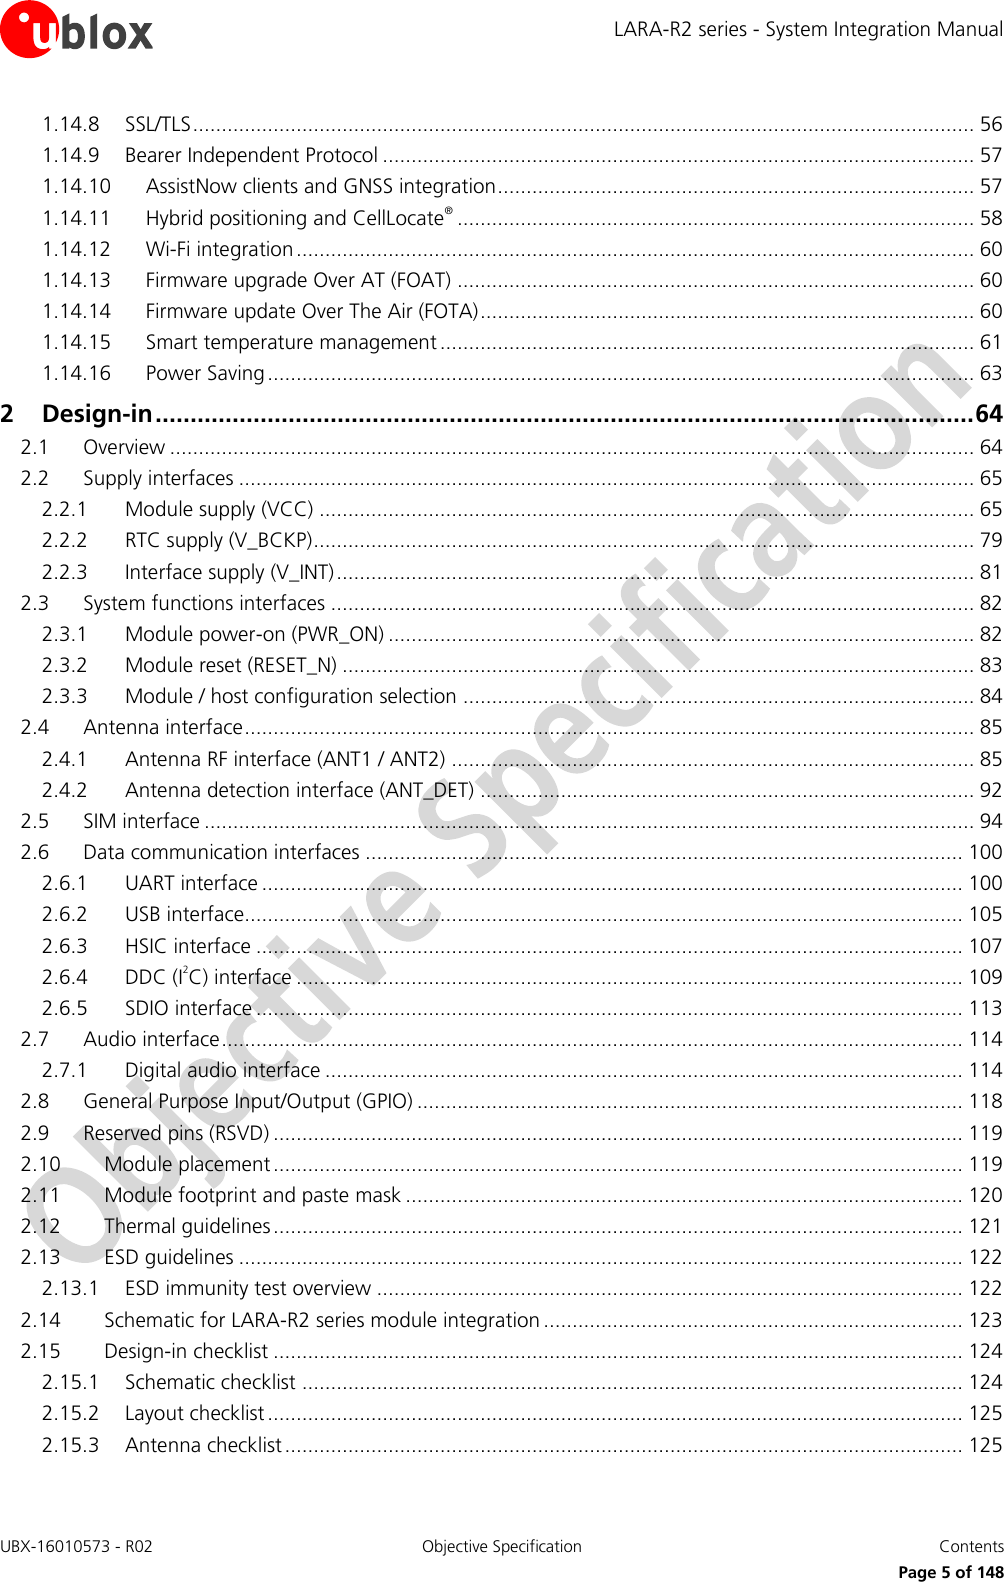 LARA-R2 series - System Integration Manual UBX-16010573 - R02  Objective Specification  Contents     Page 5 of 148 1.14.8 SSL/TLS ........................................................................................................................................ 56 1.14.9 Bearer Independent Protocol ....................................................................................................... 57 1.14.10 AssistNow clients and GNSS integration ................................................................................... 57 1.14.11 Hybrid positioning and CellLocate® .......................................................................................... 58 1.14.12 Wi-Fi integration ...................................................................................................................... 60 1.14.13 Firmware upgrade Over AT (FOAT) .......................................................................................... 60 1.14.14 Firmware update Over The Air (FOTA) ...................................................................................... 60 1.14.15 Smart temperature management ............................................................................................. 61 1.14.16 Power Saving ........................................................................................................................... 63 2 Design-in ..................................................................................................................... 64 2.1 Overview ............................................................................................................................................ 64 2.2 Supply interfaces ................................................................................................................................ 65 2.2.1 Module supply (VCC) .................................................................................................................. 65 2.2.2 RTC supply (V_BCKP) ................................................................................................................... 79 2.2.3 Interface supply (V_INT) ............................................................................................................... 81 2.3 System functions interfaces ................................................................................................................ 82 2.3.1 Module power-on (PWR_ON) ...................................................................................................... 82 2.3.2 Module reset (RESET_N) .............................................................................................................. 83 2.3.3 Module / host configuration selection ......................................................................................... 84 2.4 Antenna interface ............................................................................................................................... 85 2.4.1 Antenna RF interface (ANT1 / ANT2) ........................................................................................... 85 2.4.2 Antenna detection interface (ANT_DET) ...................................................................................... 92 2.5 SIM interface ...................................................................................................................................... 94 2.6 Data communication interfaces ........................................................................................................ 100 2.6.1 UART interface .......................................................................................................................... 100 2.6.2 USB interface............................................................................................................................. 105 2.6.3 HSIC interface ........................................................................................................................... 107 2.6.4 DDC (I2C) interface .................................................................................................................... 109 2.6.5 SDIO interface ........................................................................................................................... 113 2.7 Audio interface ................................................................................................................................. 114 2.7.1 Digital audio interface ............................................................................................................... 114 2.8 General Purpose Input/Output (GPIO) ............................................................................................... 118 2.9 Reserved pins (RSVD) ........................................................................................................................ 119 2.10 Module placement ........................................................................................................................ 119 2.11 Module footprint and paste mask ................................................................................................. 120 2.12 Thermal guidelines ........................................................................................................................ 121 2.13 ESD guidelines .............................................................................................................................. 122 2.13.1 ESD immunity test overview ...................................................................................................... 122 2.14 Schematic for LARA-R2 series module integration ......................................................................... 123 2.15 Design-in checklist ........................................................................................................................ 124 2.15.1 Schematic checklist ................................................................................................................... 124 2.15.2 Layout checklist ......................................................................................................................... 125 2.15.3 Antenna checklist ...................................................................................................................... 125 